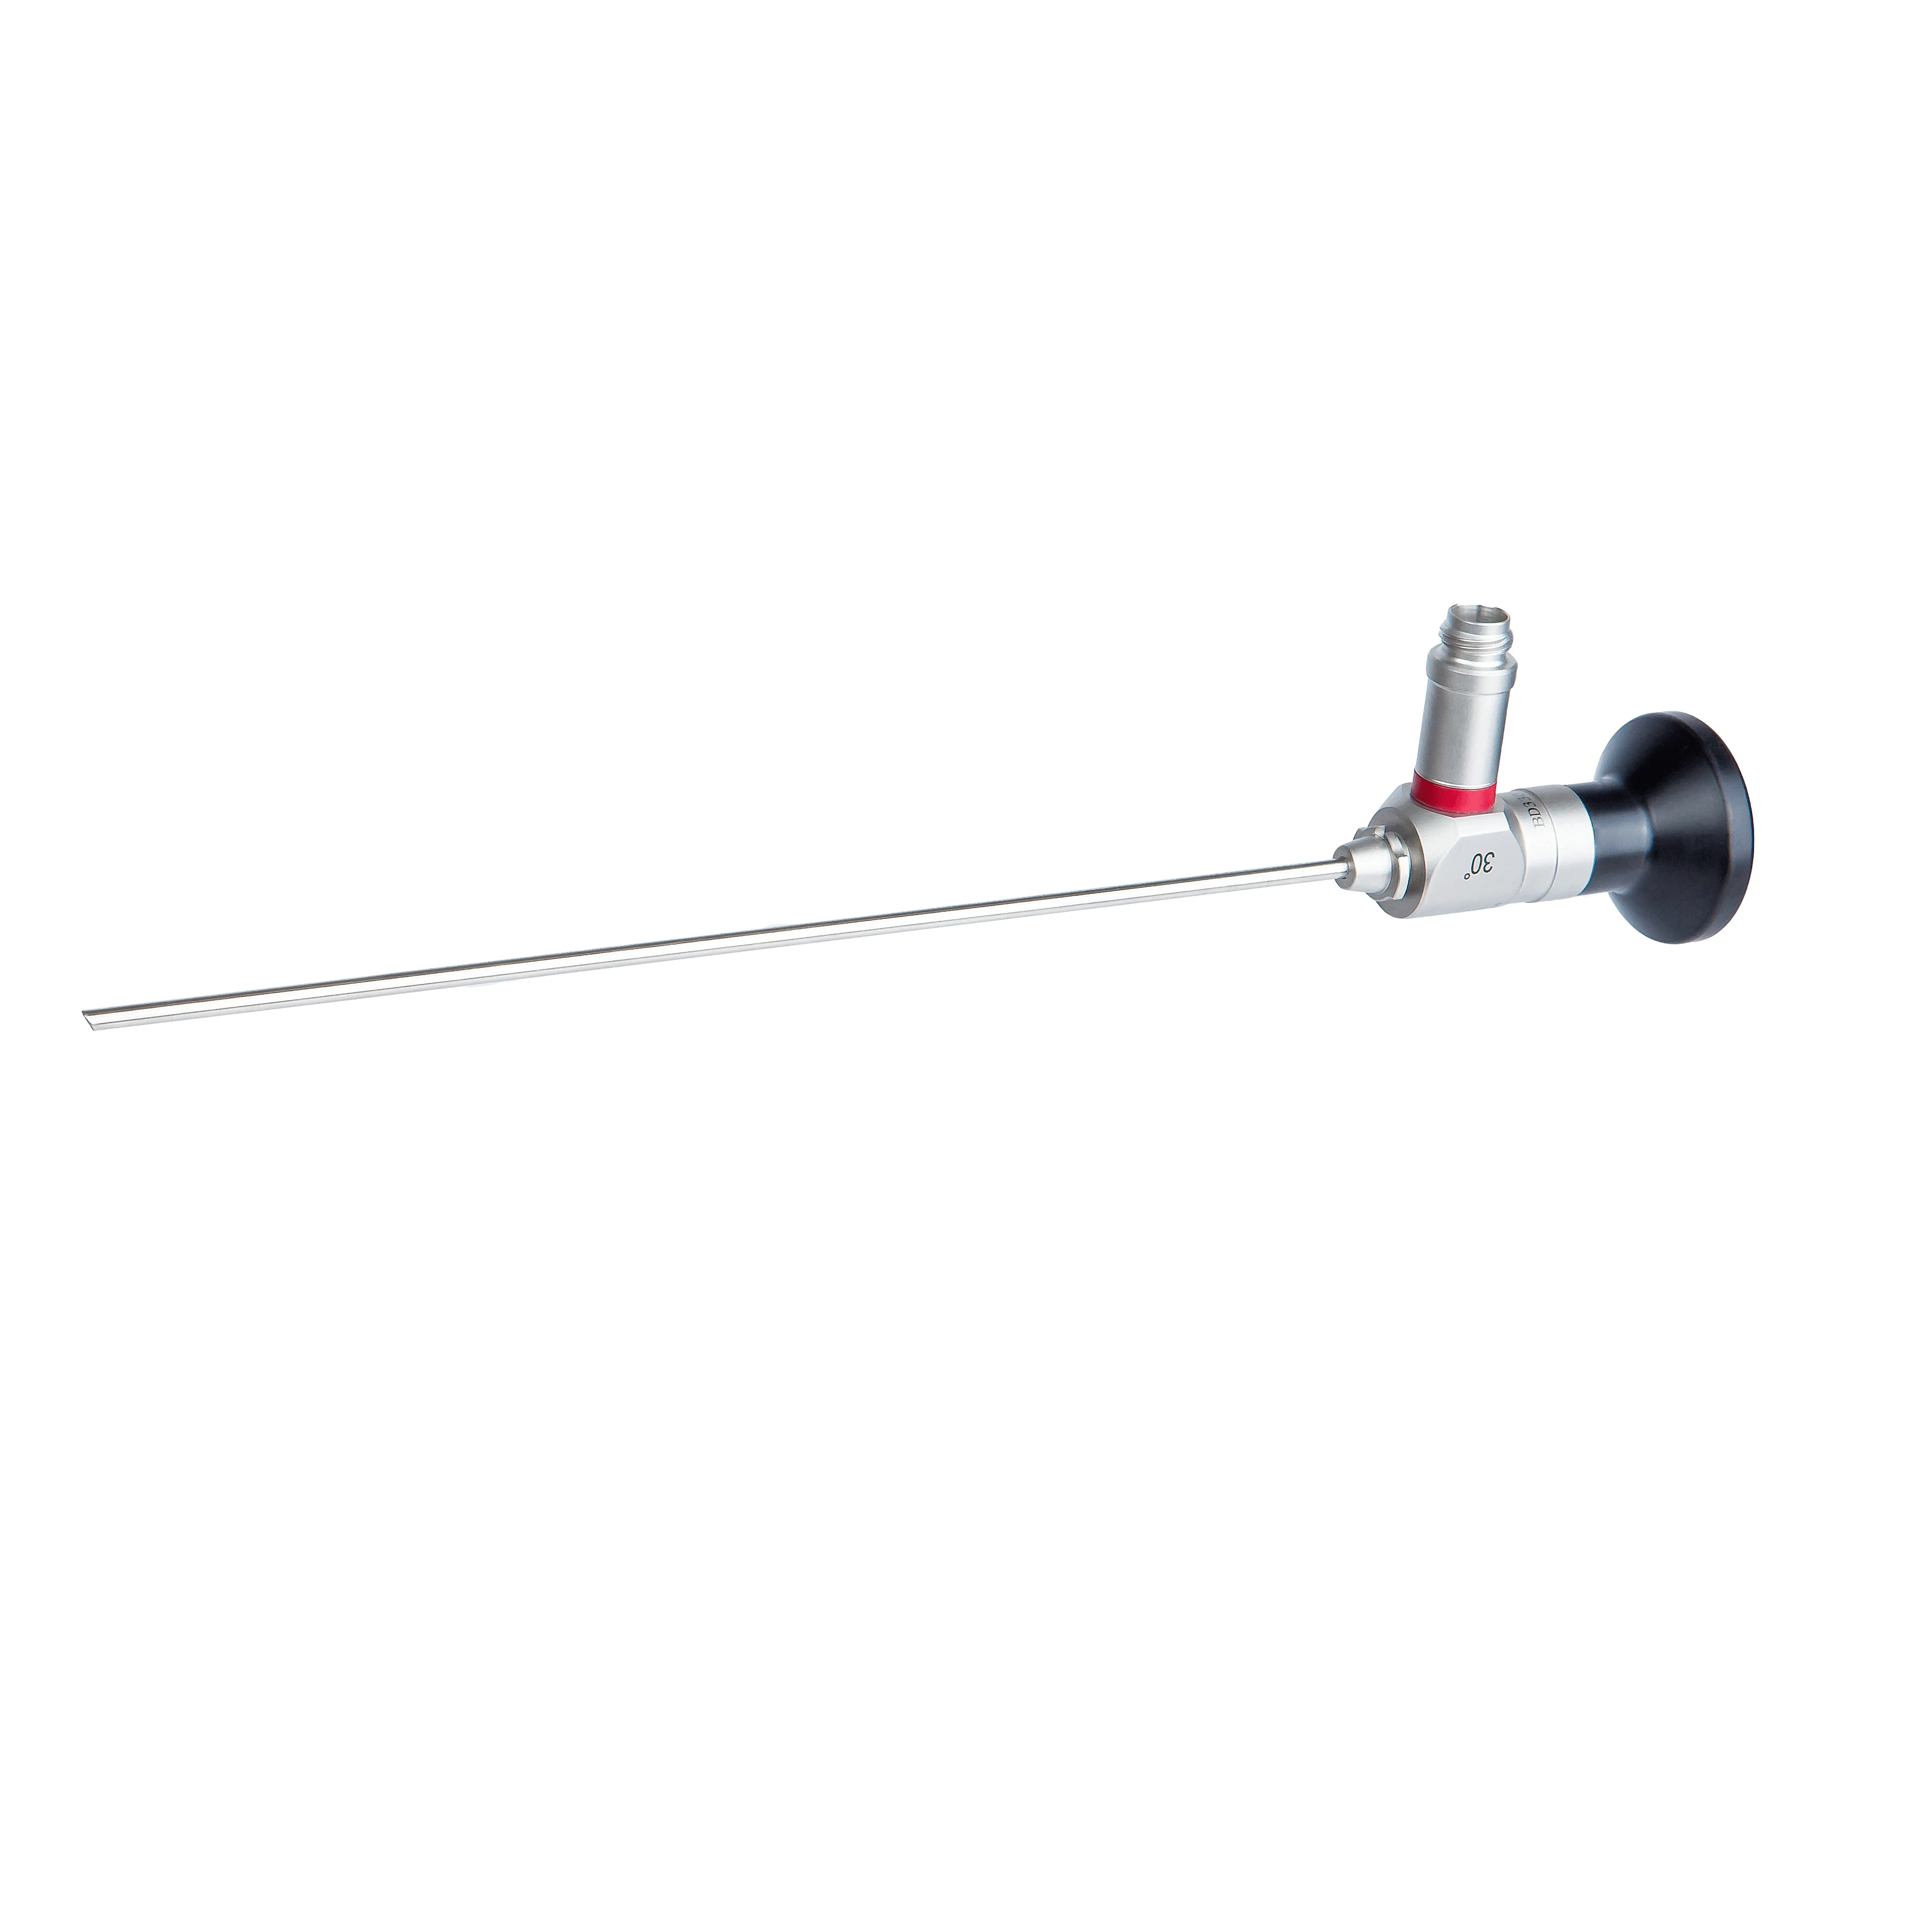 
Resectoscope and Cystoscope with Sheath Obturator and Working Insertpart for Urology Surgery 